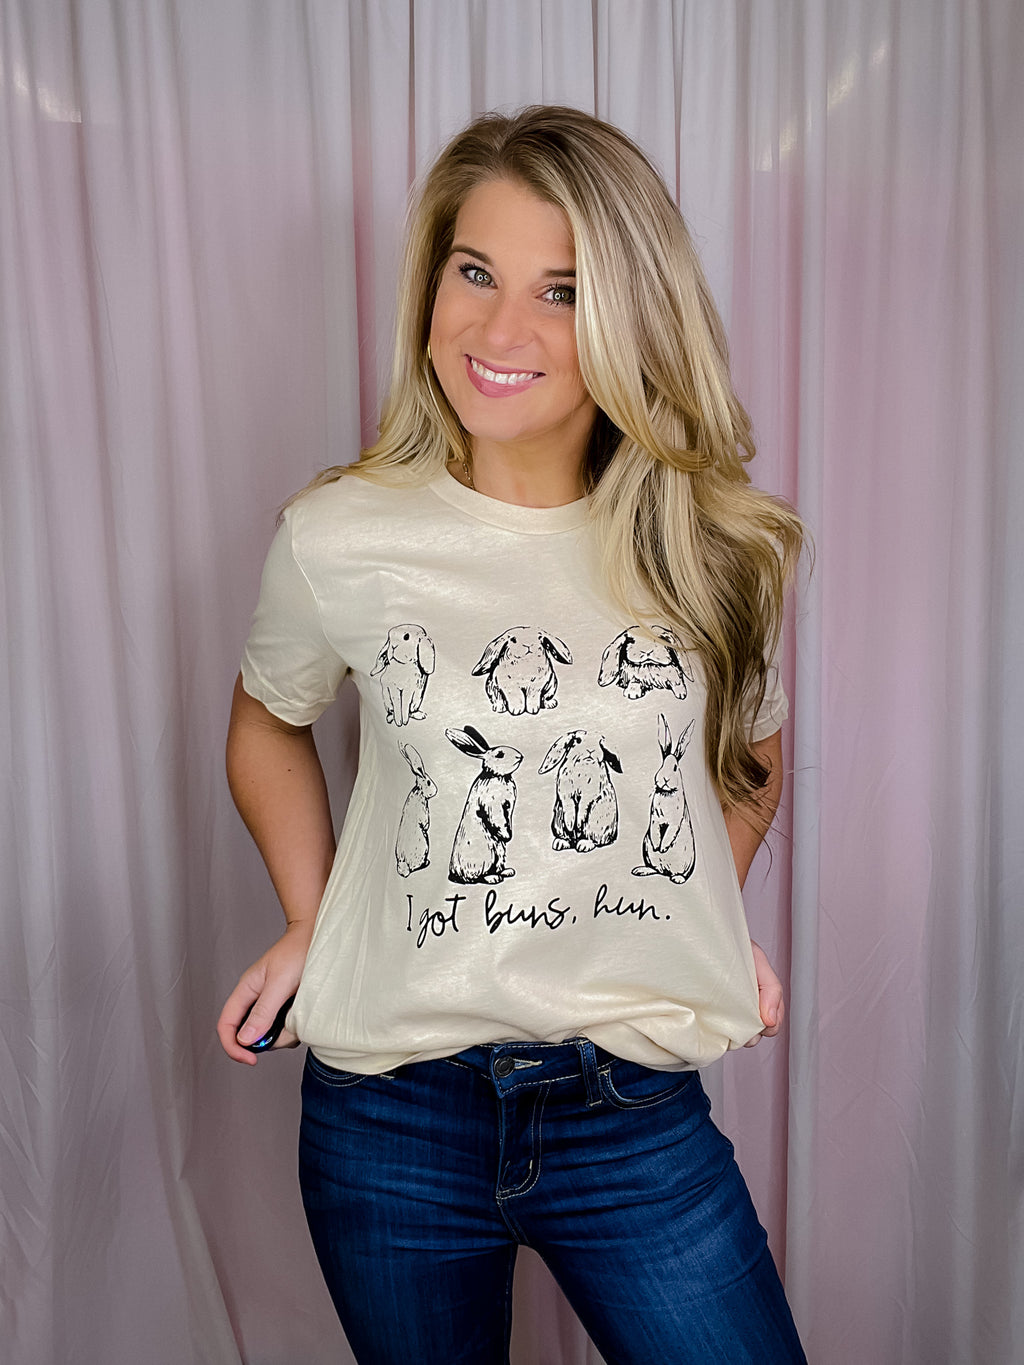 This I Got Buns Hun Tee is perfect for Easter! It features short sleeves, a round neckline, and an unisex fit, plus a playful bunny motif. The phrase 'Got Buns Hun' adds a fun, festive vibe. Get one now in sizes S-3XL!-oatmeal